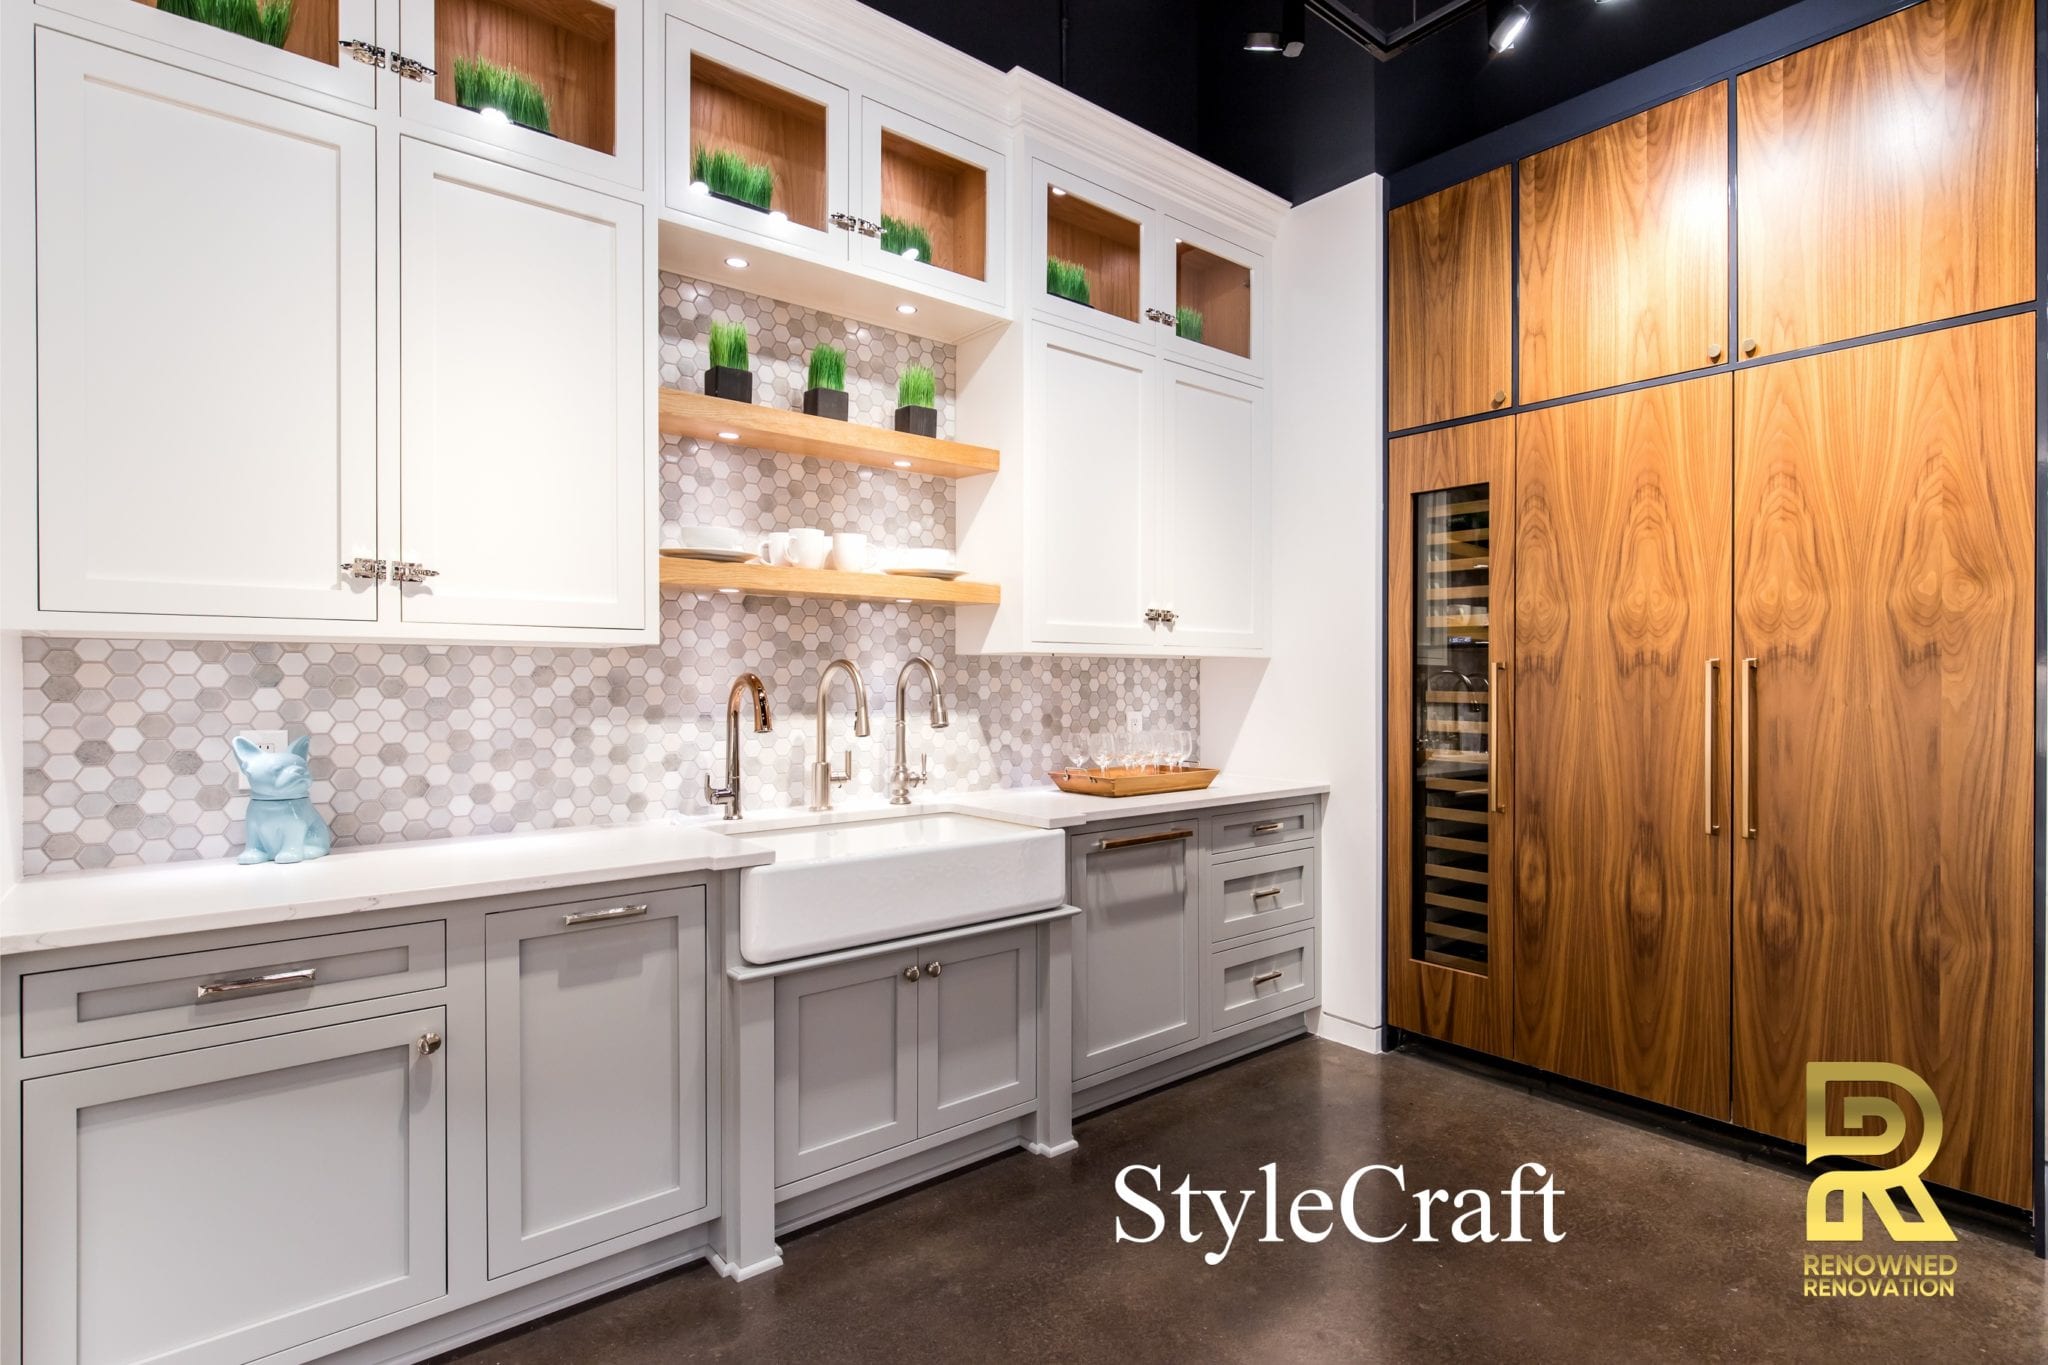 Kohler-Signature-Store-Dallas-StyleCraft-Cabinets-by-Renowned-Renovation